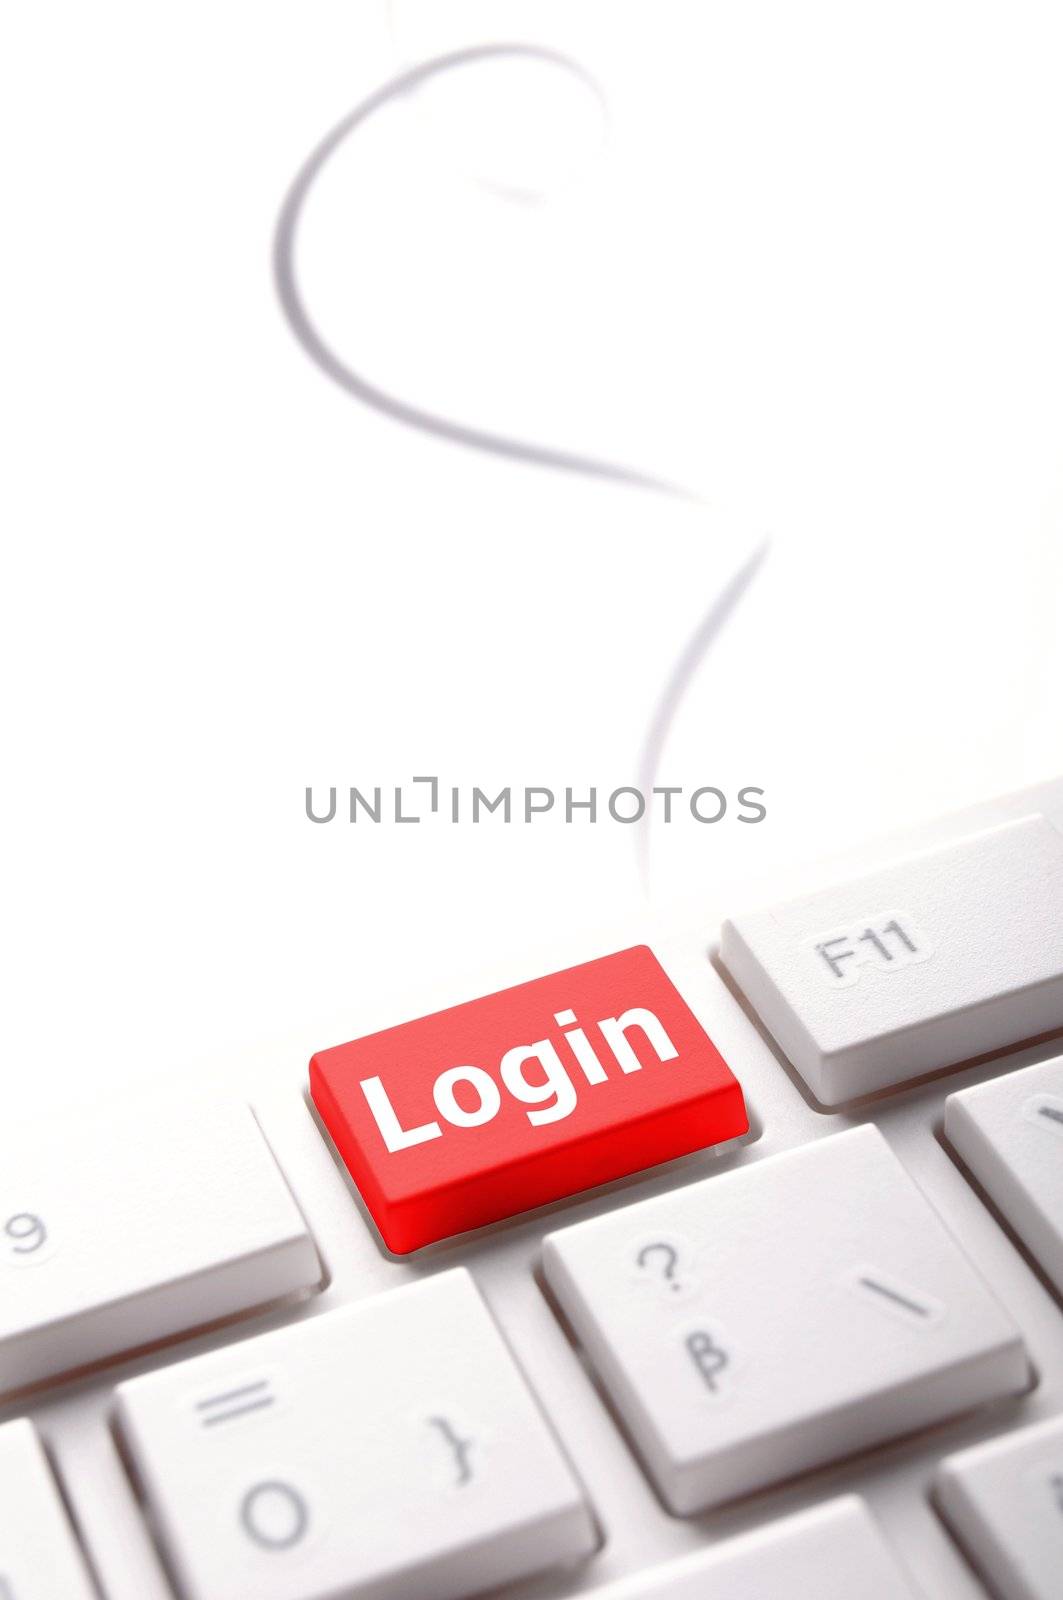 sign in or login on internet webpage concept with keyboard key